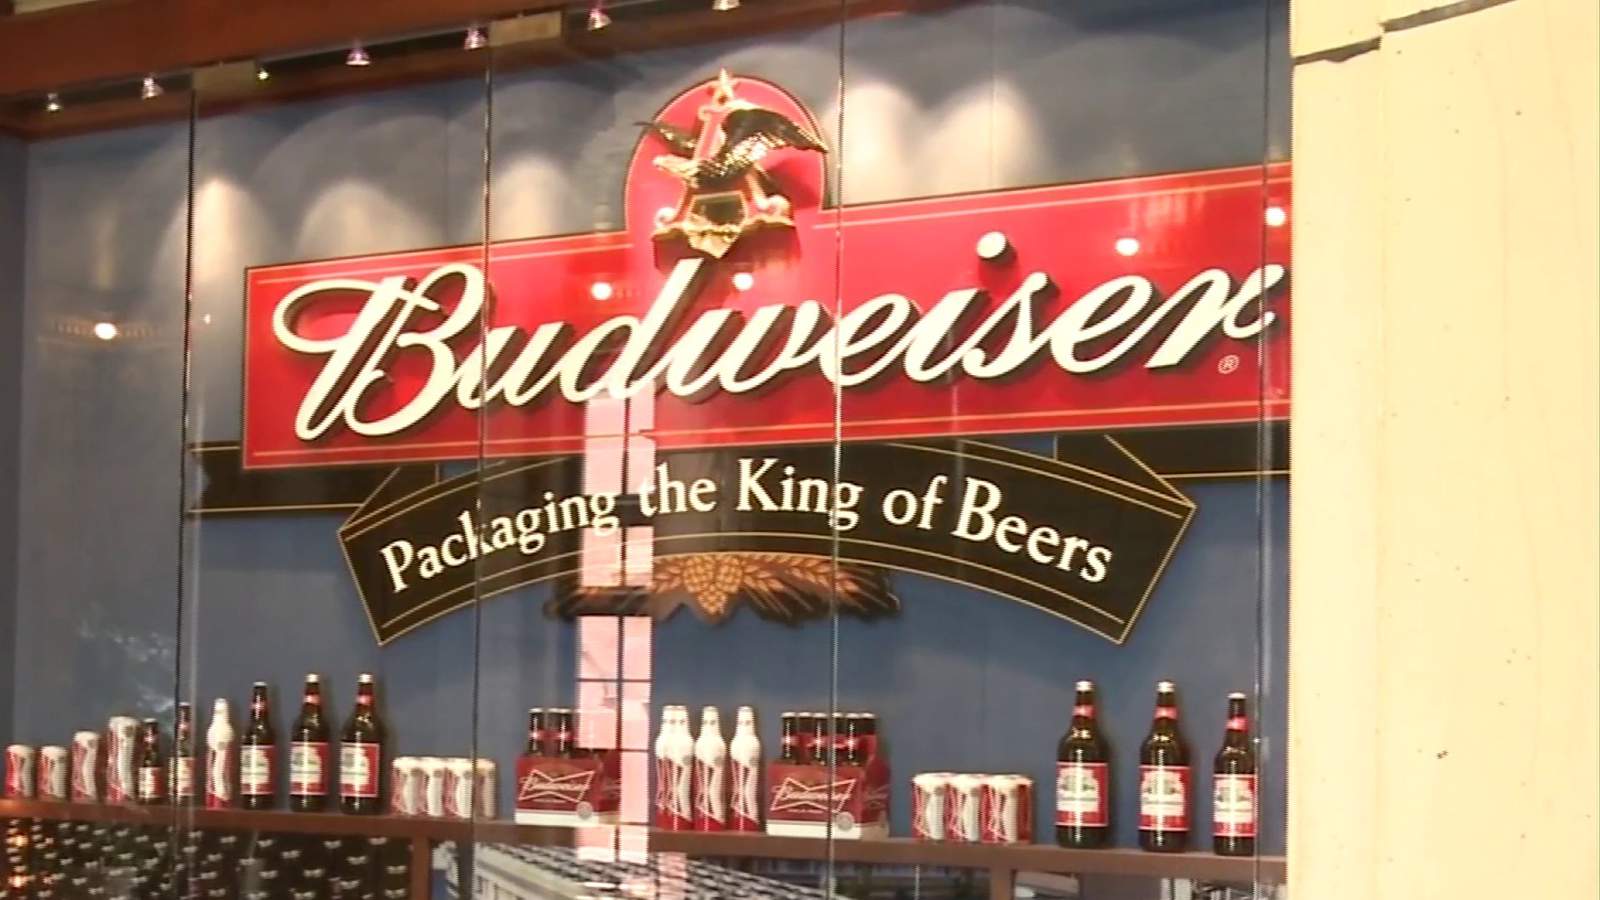 Local advertising agency calls Budweiser’s move to pull Super Bowls ‘authentic’